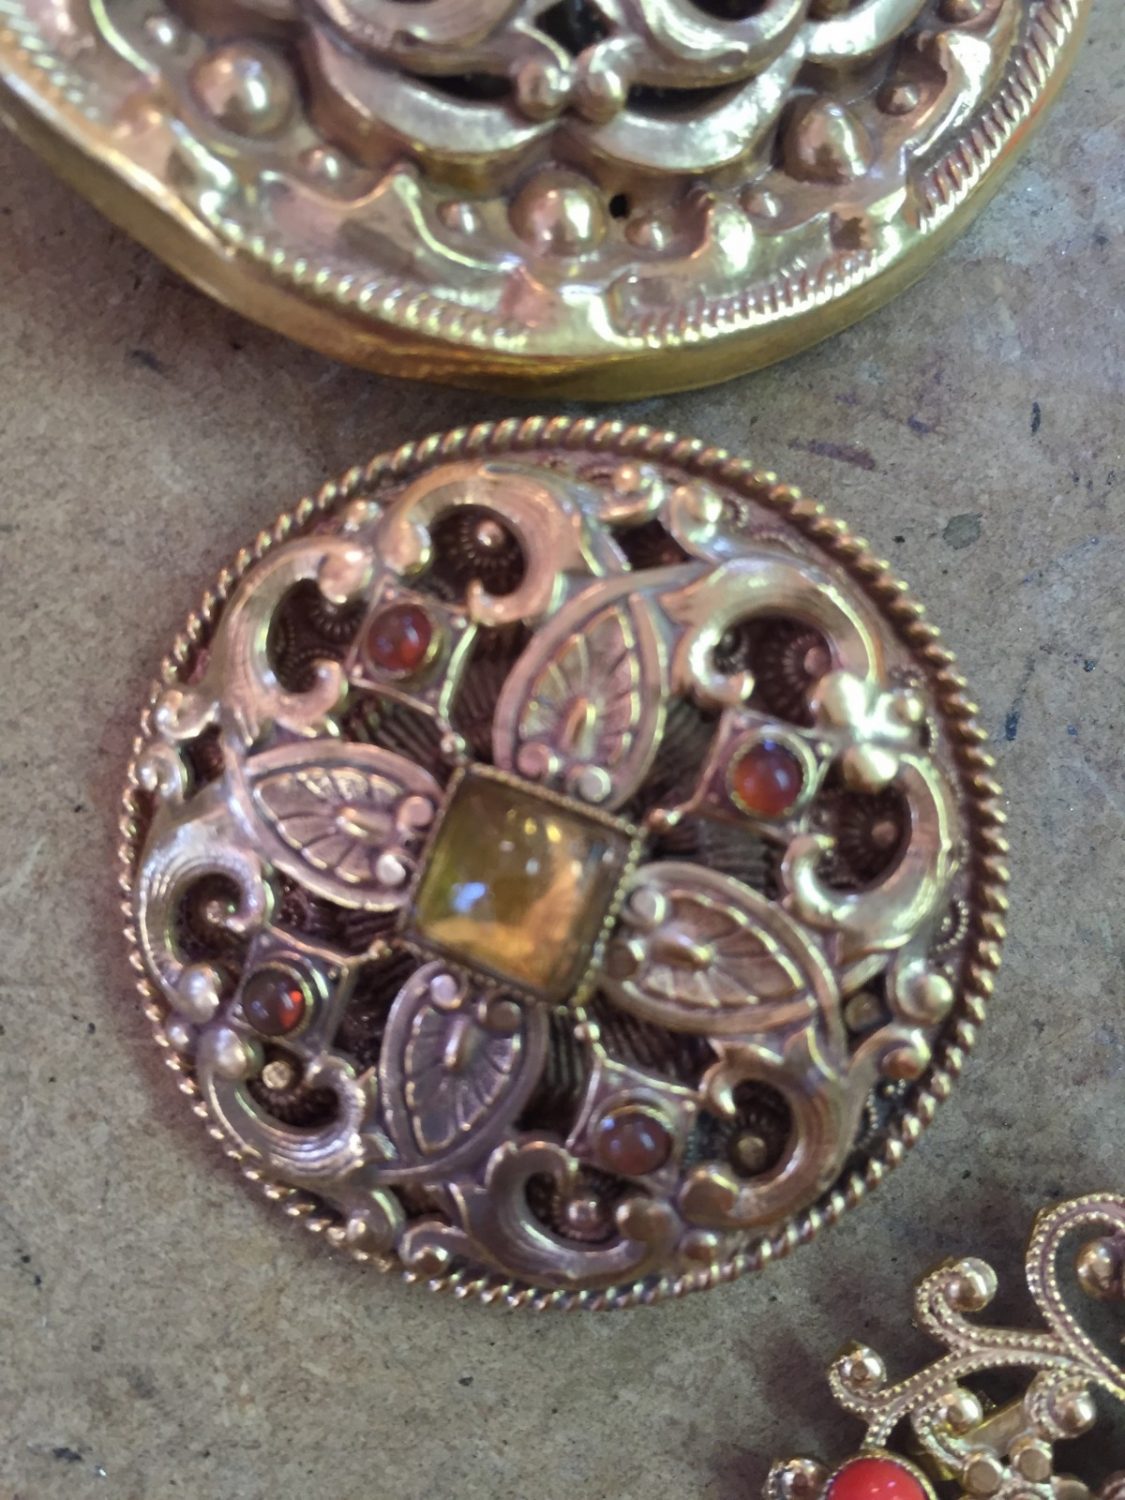 Close ups of the brooches